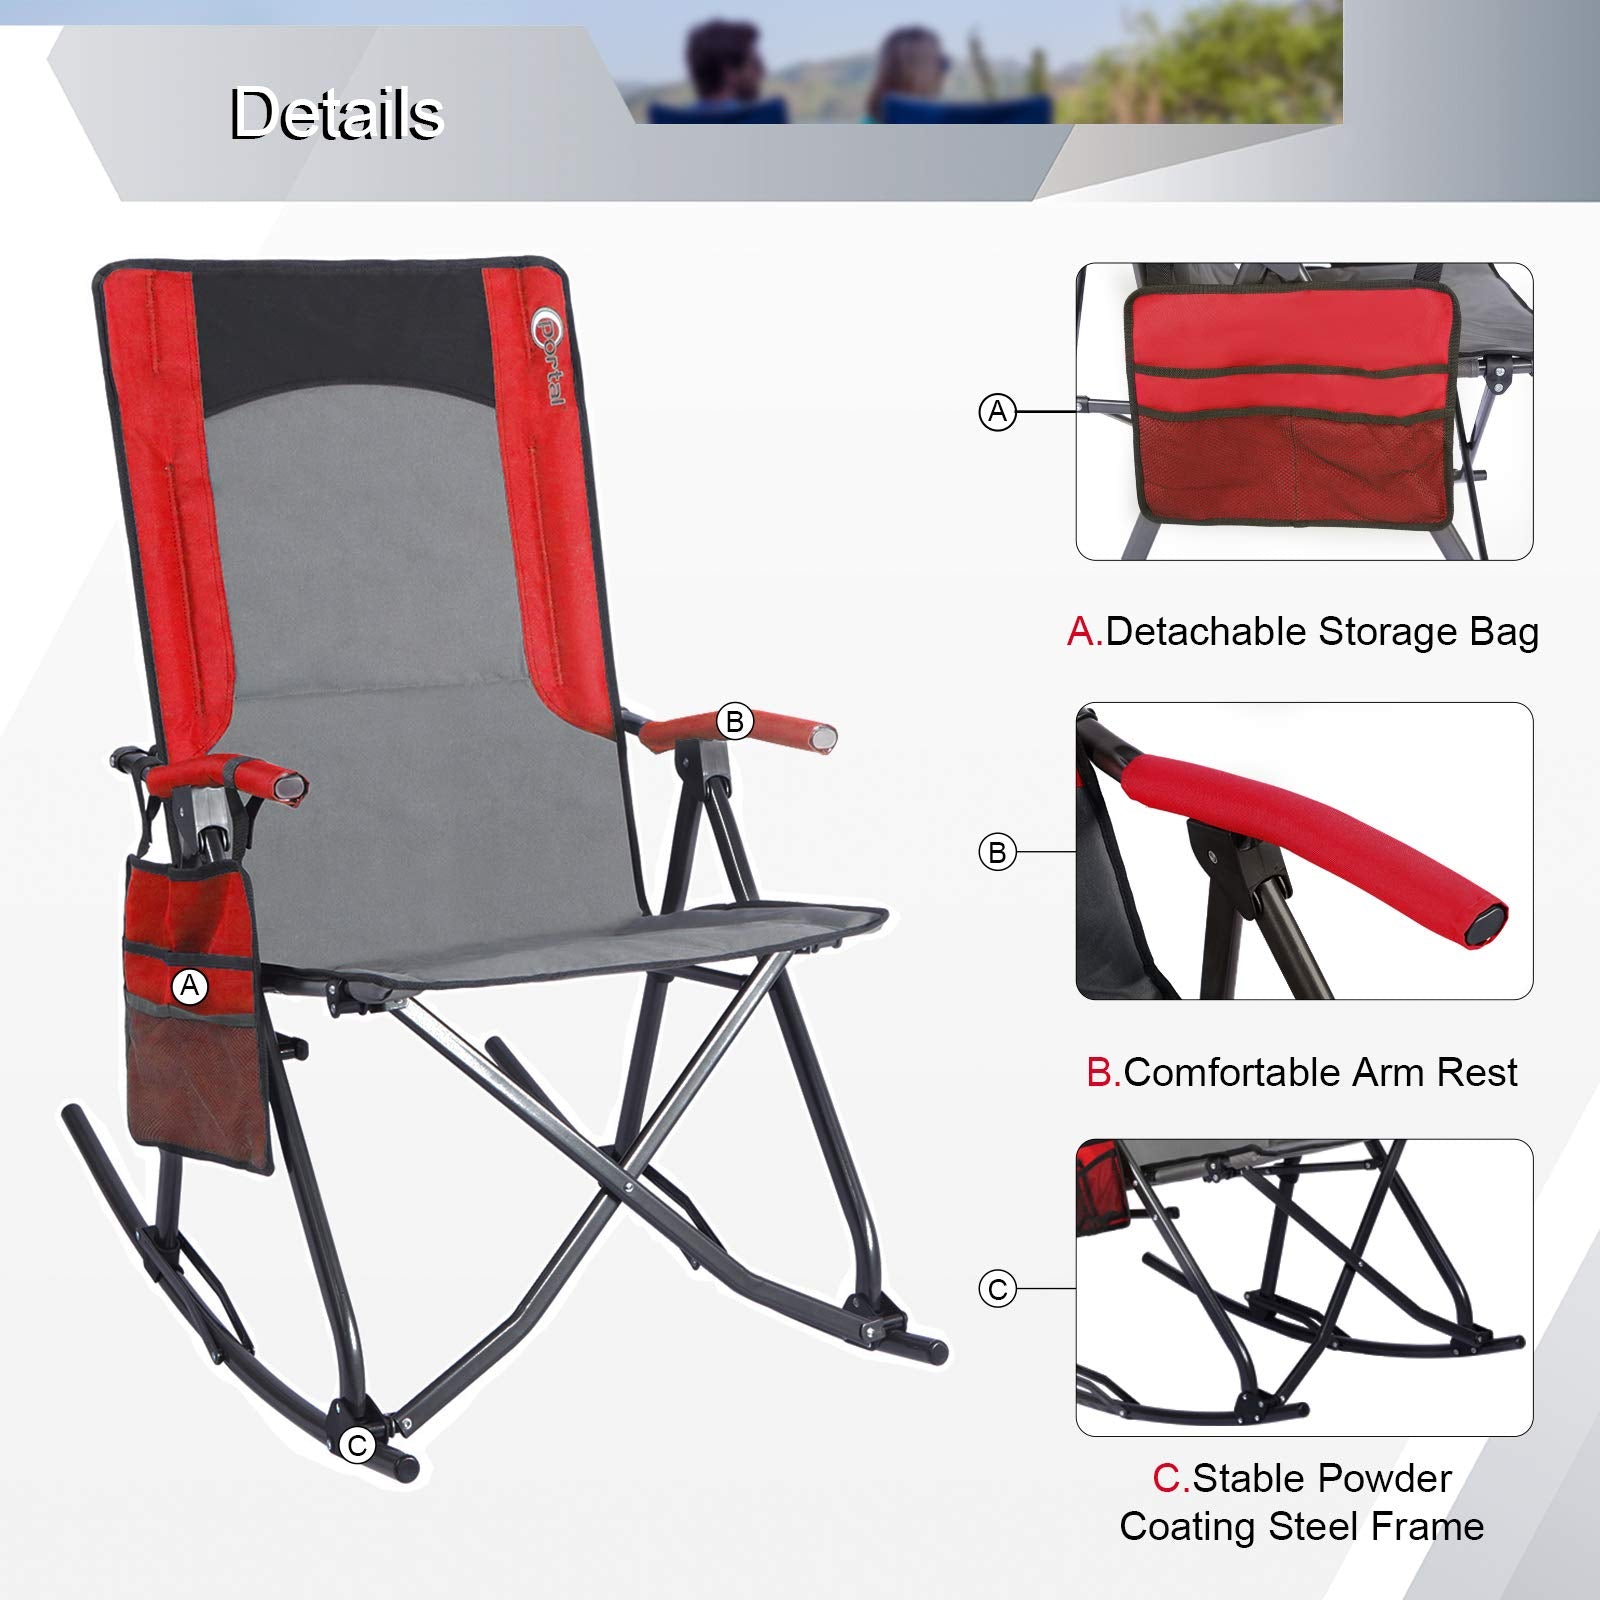 PORTAL Rocking Camping Chair Folding Portable Rocker Outdoor with Cup Holder for Patio, Lawn, Camp, RV, Support 300 lbs, RED